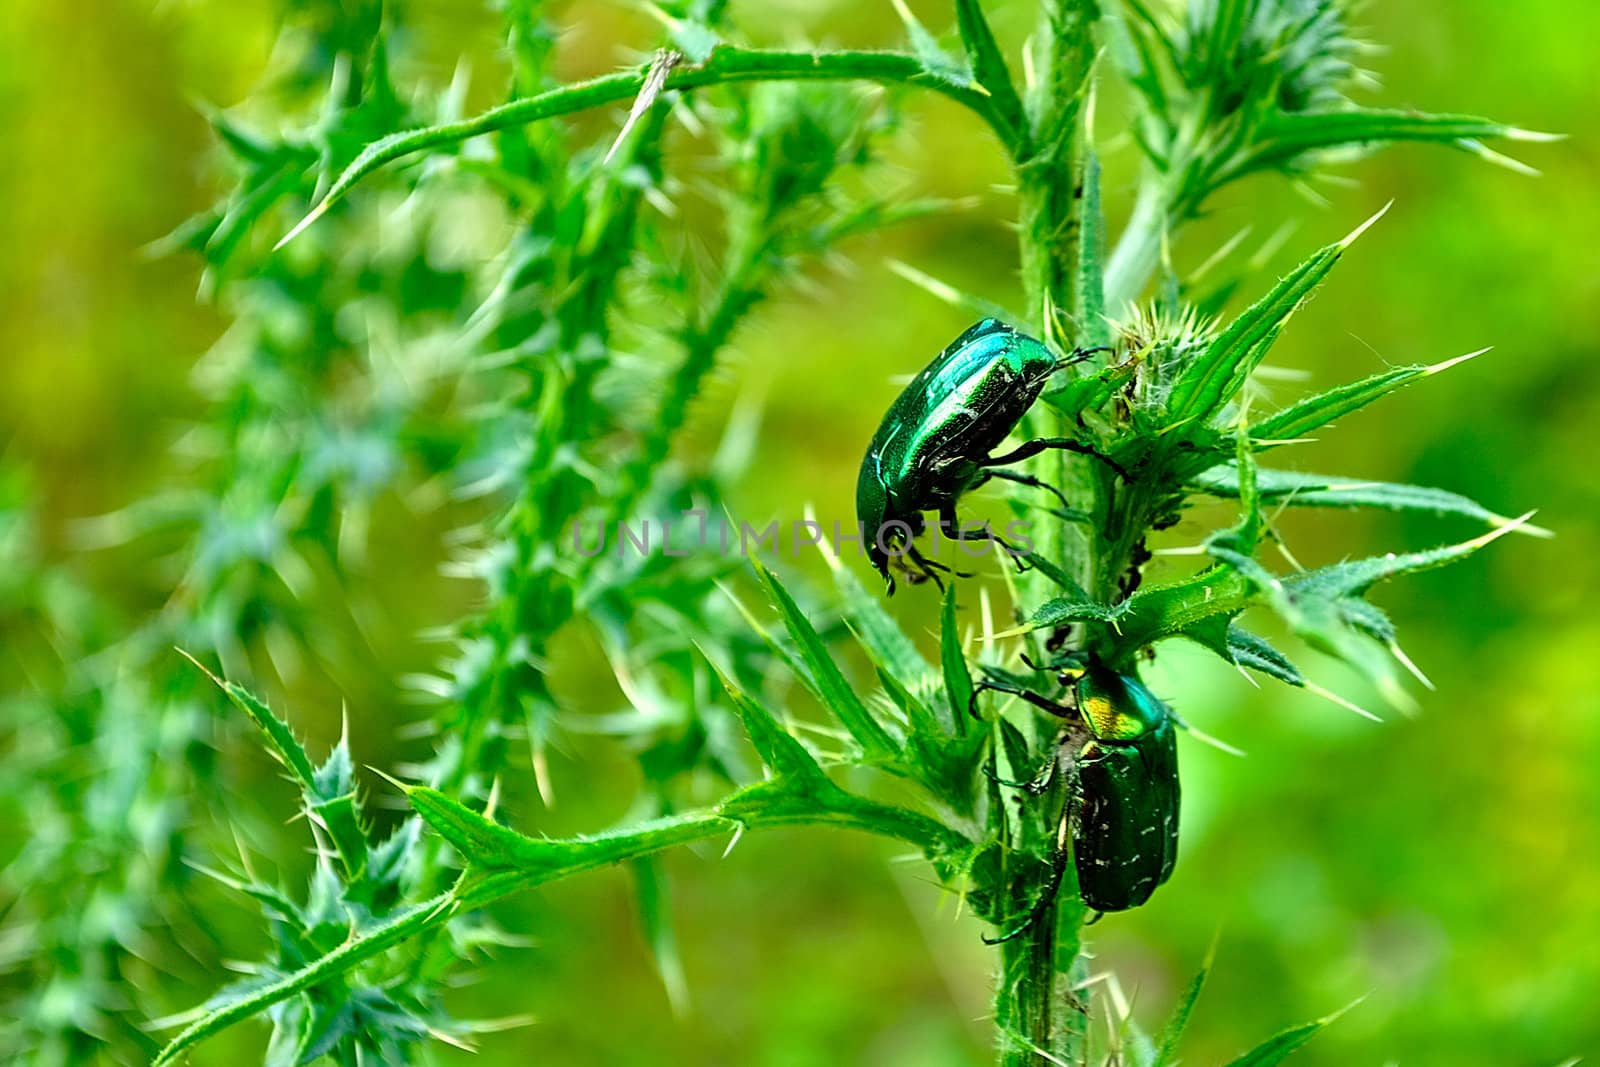 Two rose chafers (Cetonia aurata) on a green stem plants